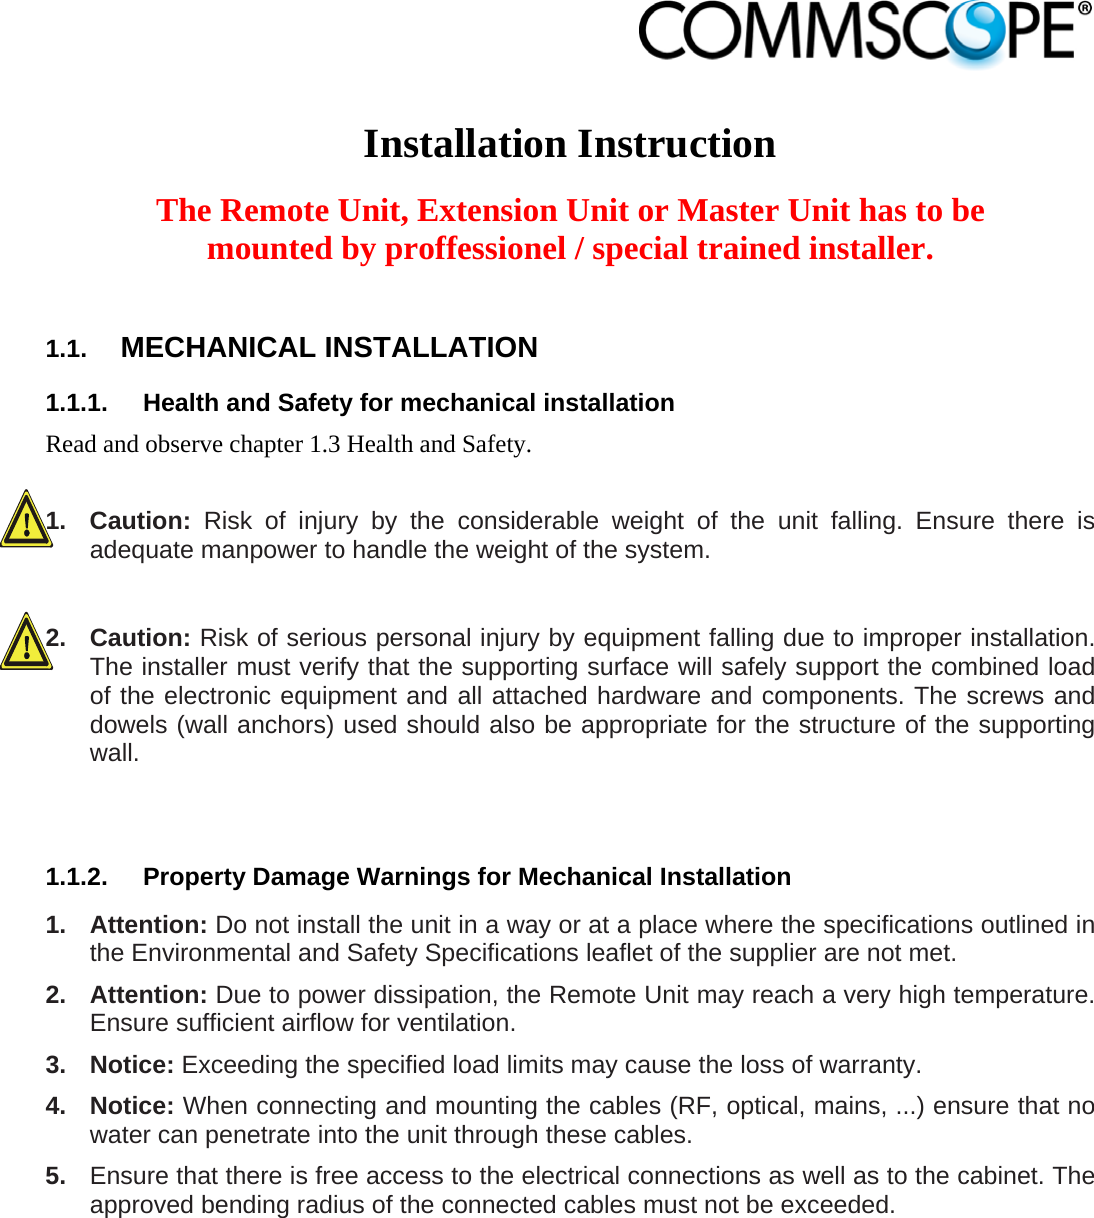                             Installation Instruction  The Remote Unit, Extension Unit or Master Unit has to be mounted by proffessionel / special trained installer.  1.1.  MECHANICAL INSTALLATION 1.1.1.  Health and Safety for mechanical installation Read and observe chapter 1.3 Health and Safety.  1. Caution: Risk of injury by the considerable weight of the unit falling. Ensure there is adequate manpower to handle the weight of the system.  2. Caution: Risk of serious personal injury by equipment falling due to improper installation. The installer must verify that the supporting surface will safely support the combined load of the electronic equipment and all attached hardware and components. The screws and dowels (wall anchors) used should also be appropriate for the structure of the supporting wall.   1.1.2.  Property Damage Warnings for Mechanical Installation 1. Attention: Do not install the unit in a way or at a place where the specifications outlined in the Environmental and Safety Specifications leaflet of the supplier are not met. 2. Attention: Due to power dissipation, the Remote Unit may reach a very high temperature. Ensure sufficient airflow for ventilation. 3. Notice: Exceeding the specified load limits may cause the loss of warranty. 4. Notice: When connecting and mounting the cables (RF, optical, mains, ...) ensure that no water can penetrate into the unit through these cables. 5.  Ensure that there is free access to the electrical connections as well as to the cabinet. The approved bending radius of the connected cables must not be exceeded.  